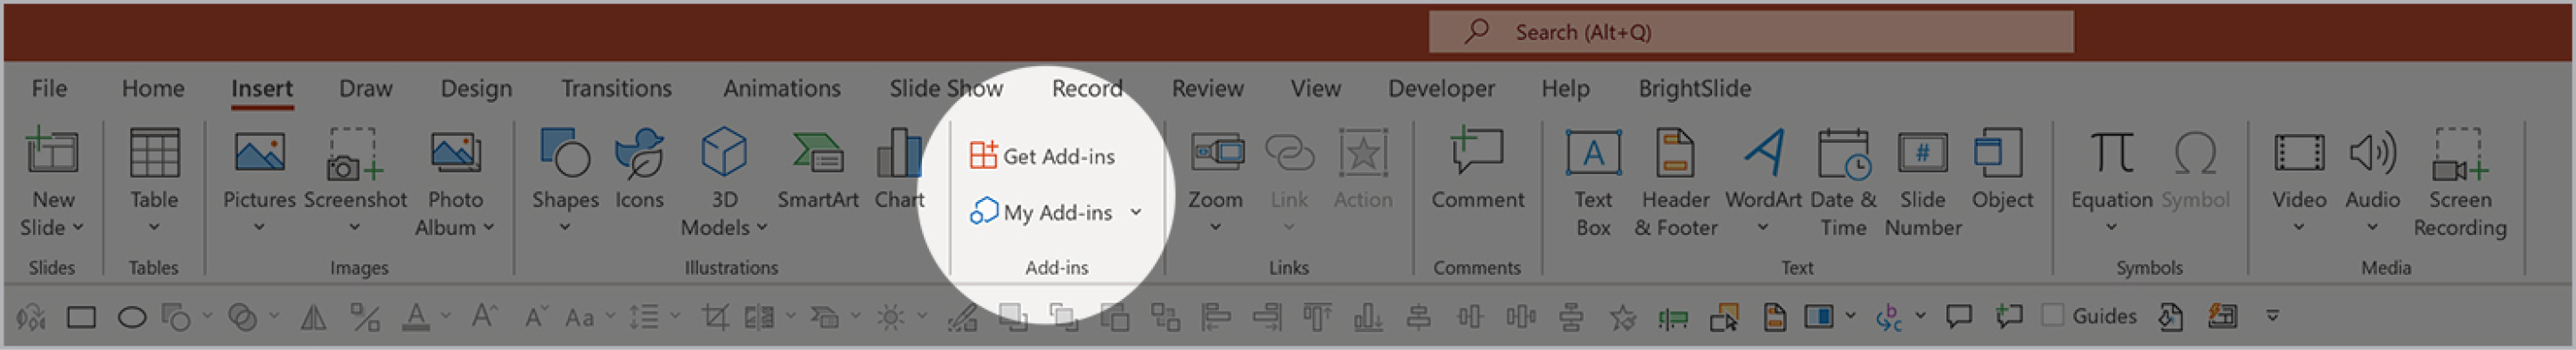 Ribbon from Microsoft PowerPoint with highlighted options to select "Get Add-Ins" and "My Add-Ins."